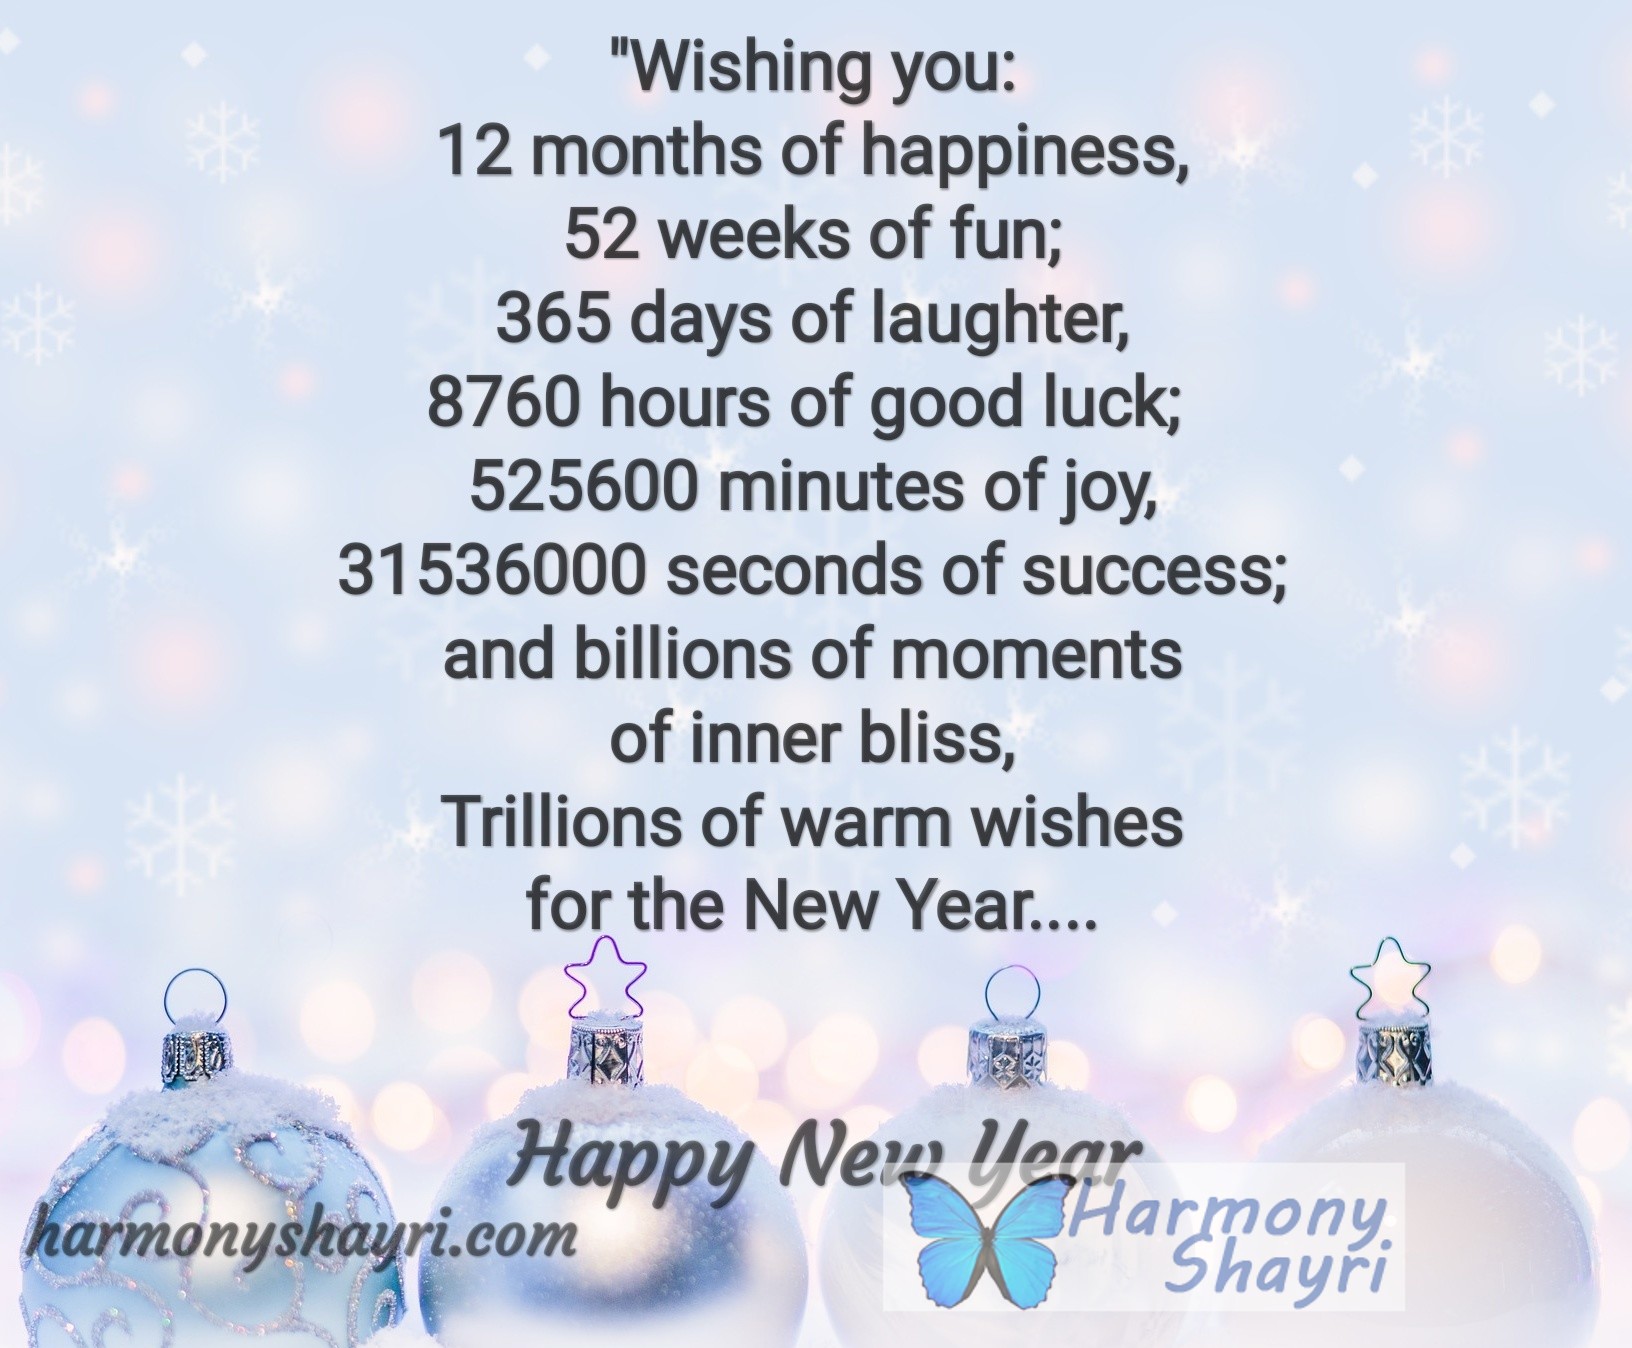 Wishing you a happy new year